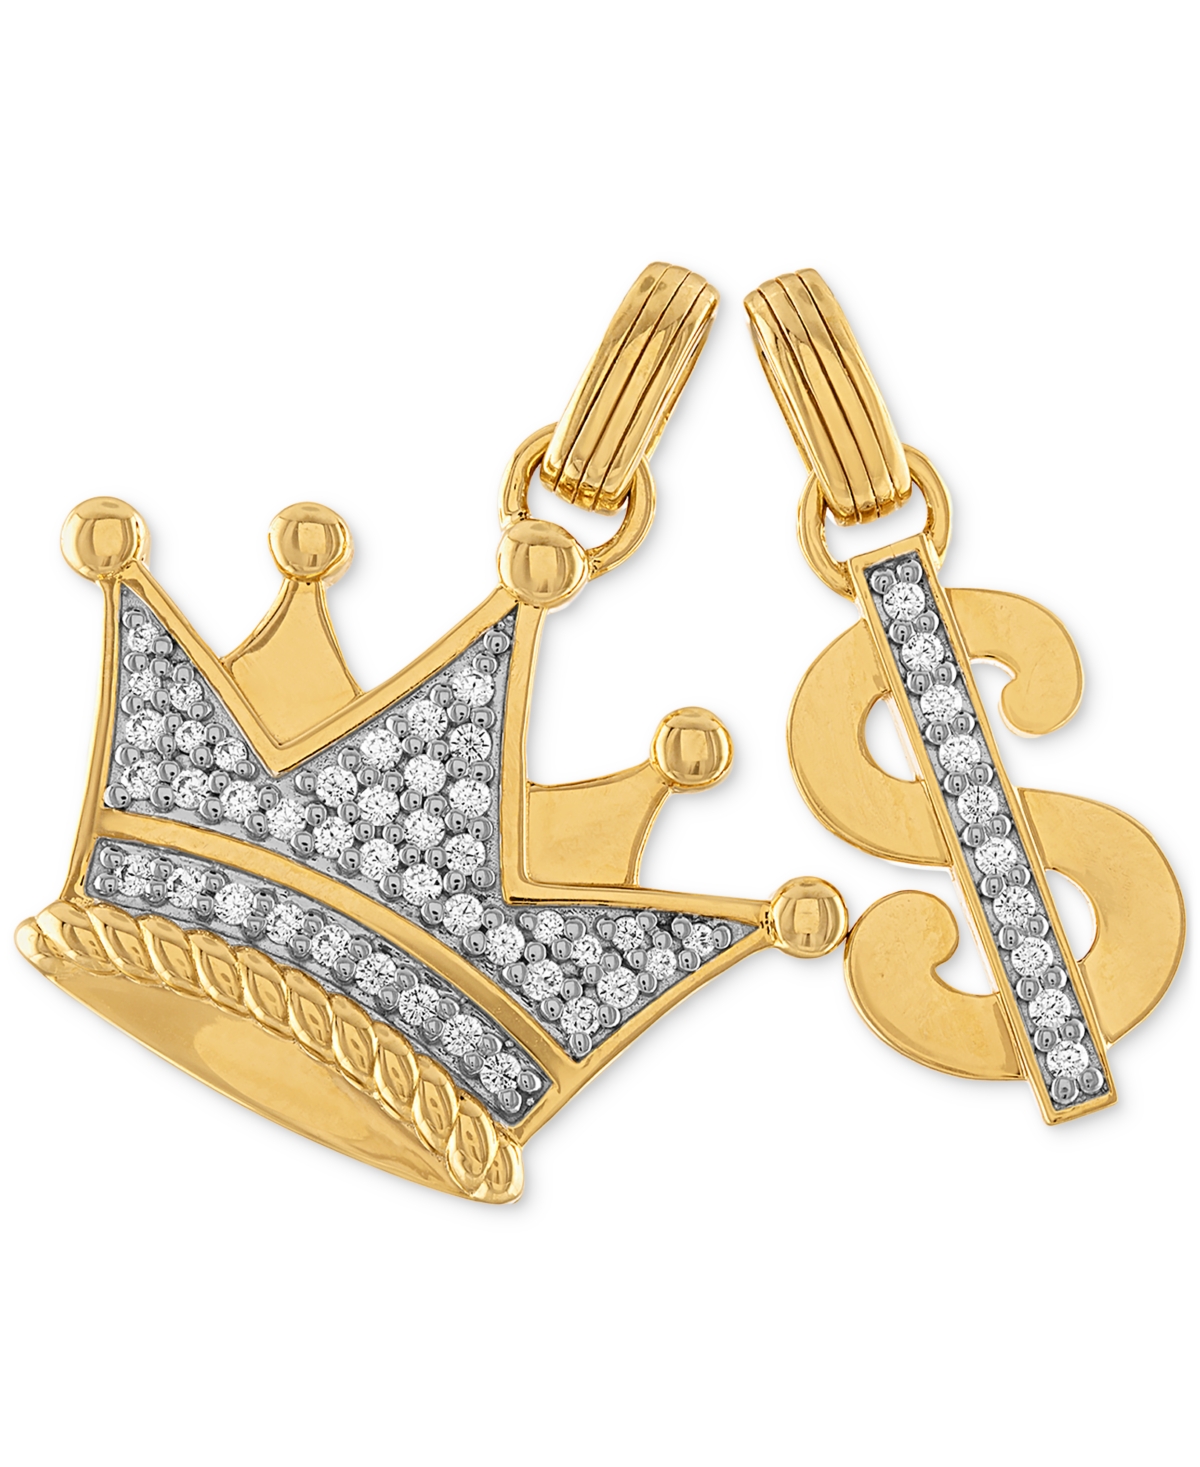 2-Pc. Set Cubic Zirconia Crown and Dollar Sign Pendants in 14k Gold-Plated Sterling Silver, Created for Macy's - Gold Over Silve